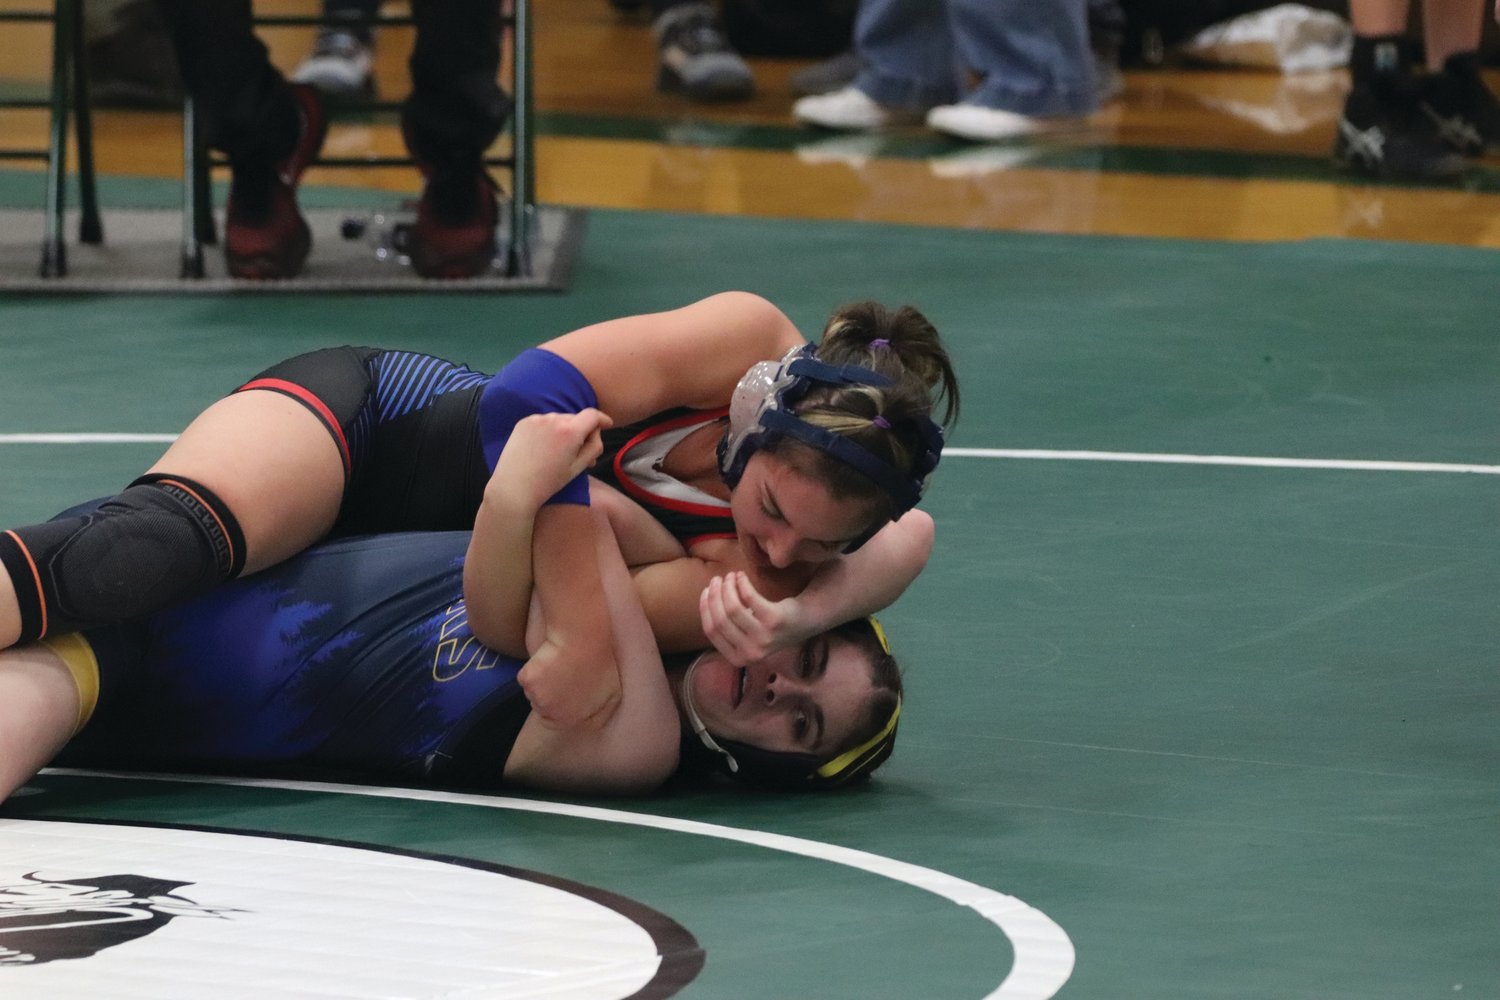 EJ senior Chloe Lampert finishes off her Forks High opponent using the “barbed wire” move, winning by fall. Lampert is a natural leader on the wrestling team, according to the coaching staff.